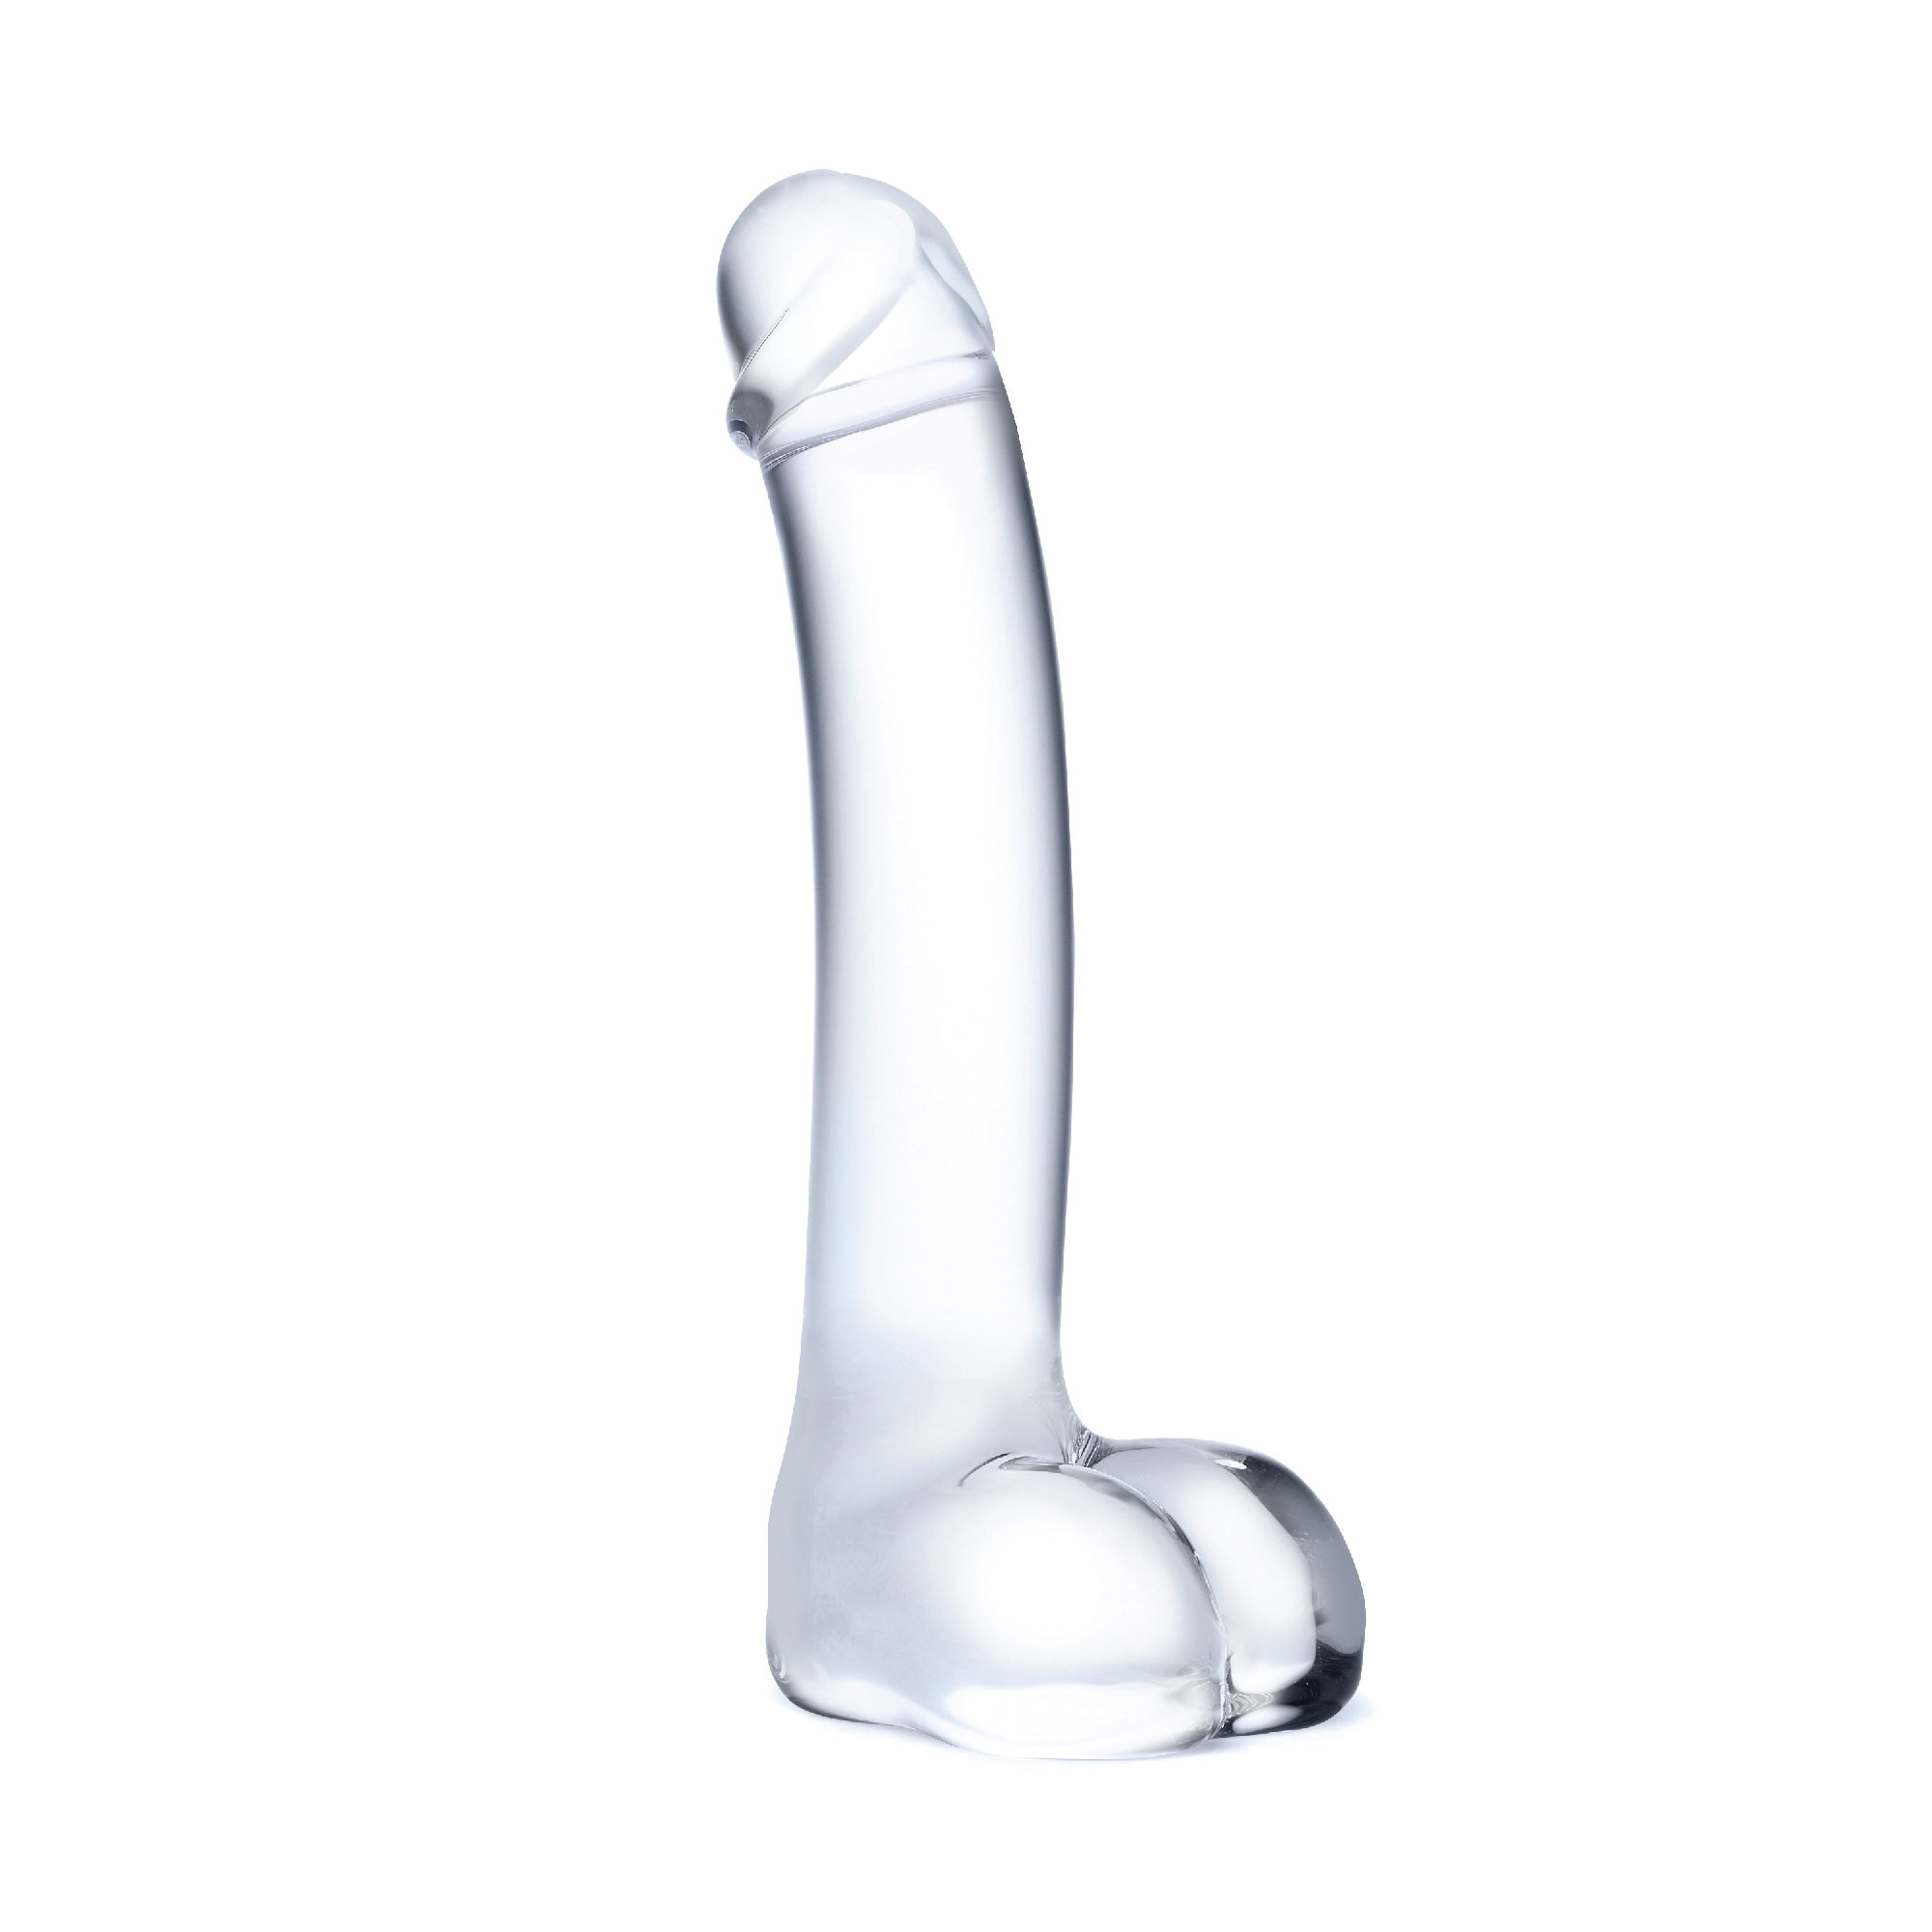 inch realistic curved glass g spot dildo clear 